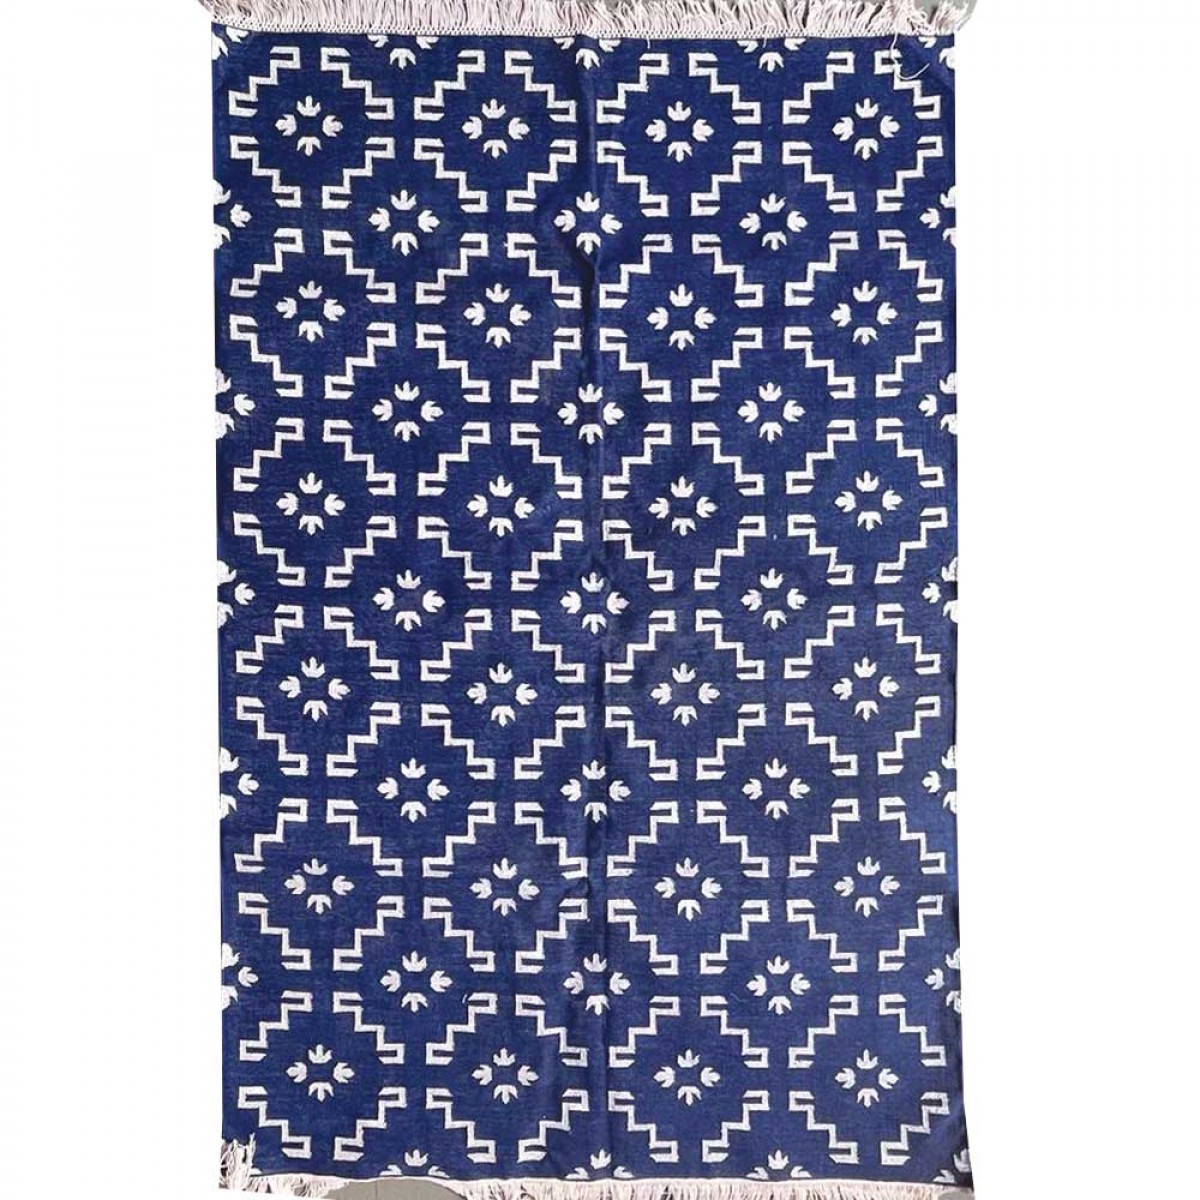 Cotton Floor Rugs -Midnight Blue (Made to Order)